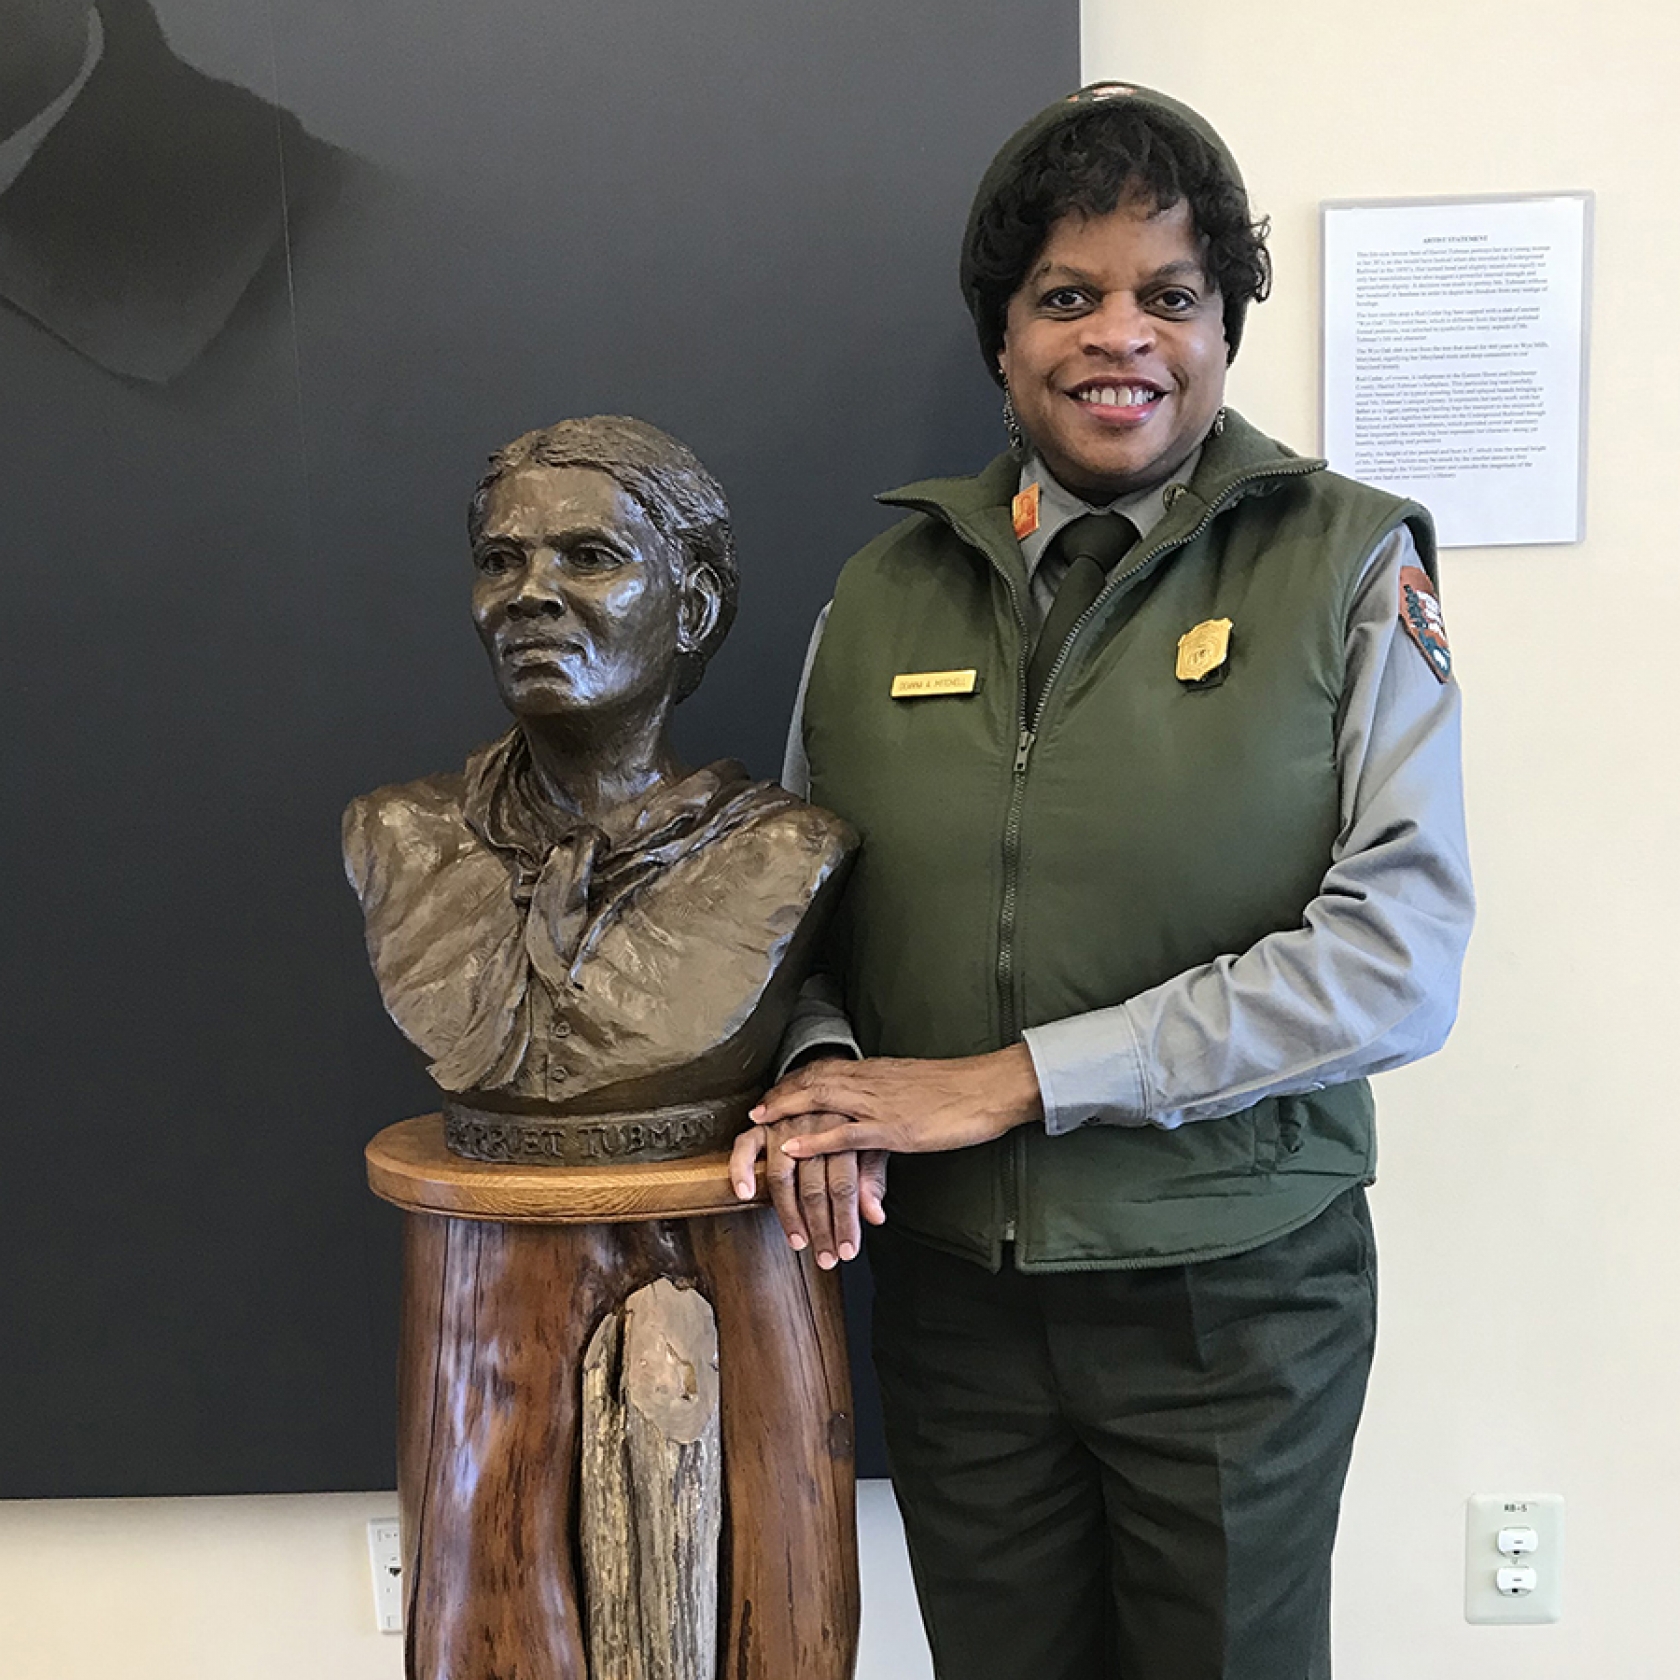 Deanna Mitchell stands next to a bust of Harriet Tubman inside the park's visitor center